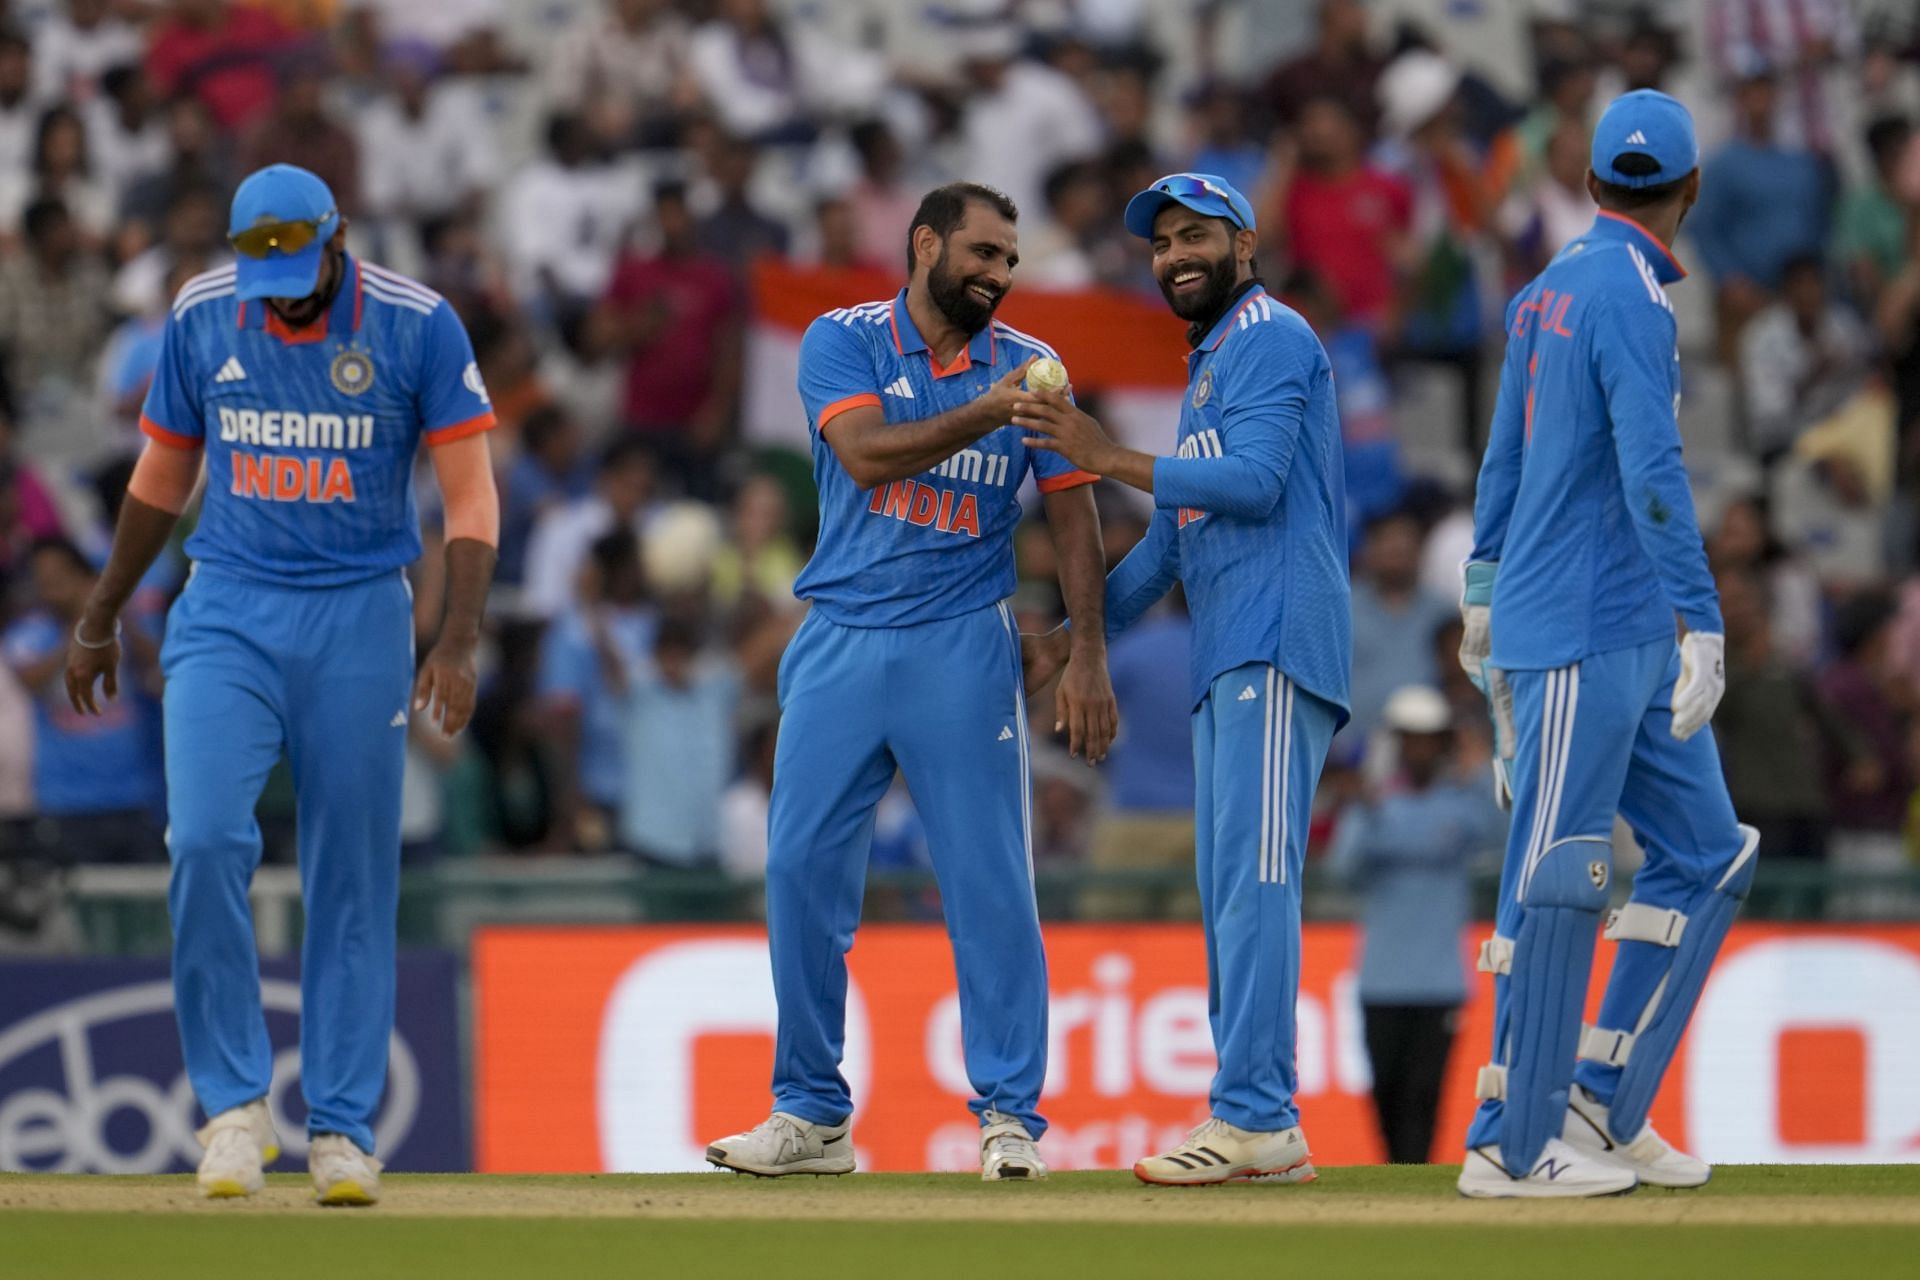 India vs Netherlands, 2023 World Cup Warm-up match Telecast Channel Where to watch and live streaming details in India